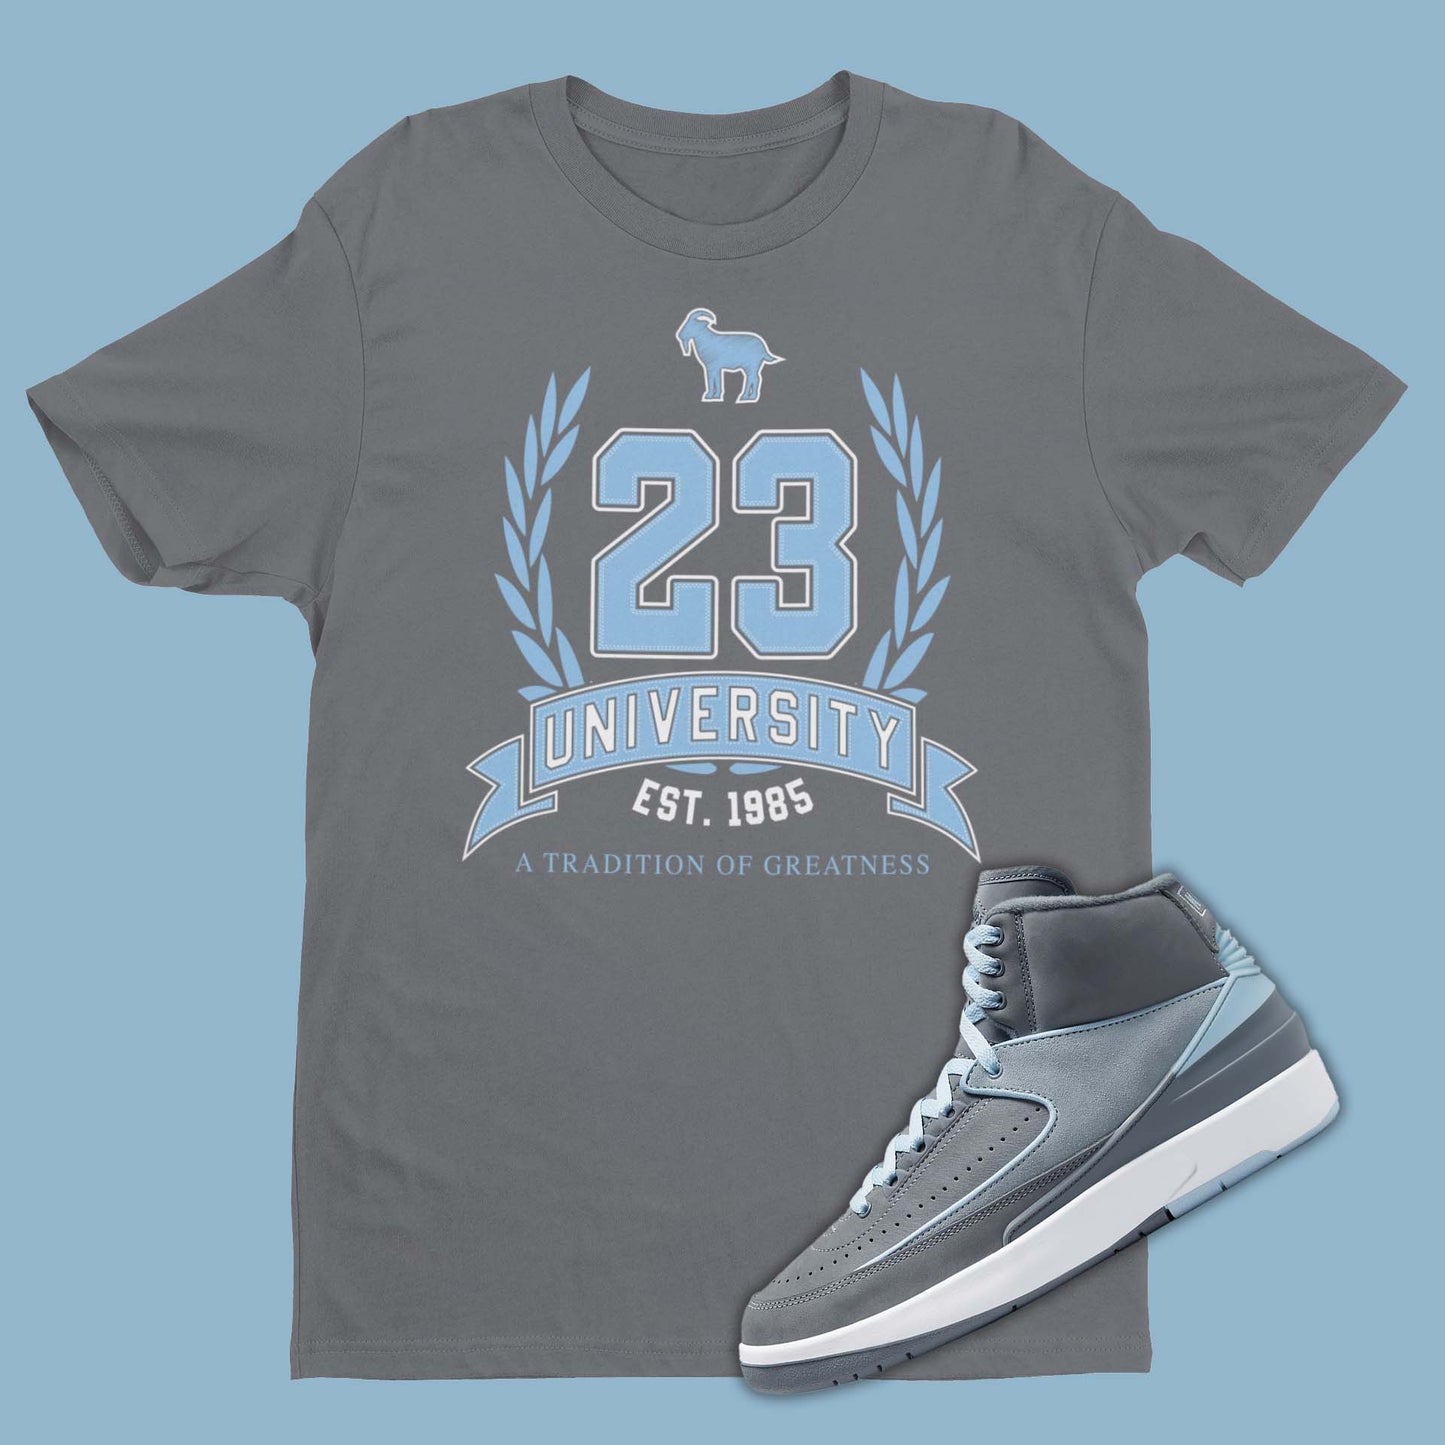 Grey t-shirt featuring a graphic of 23 University Crest with Goat emoji, designed to complement the sleek and stylish Air Jordan 2 Cool Grey sneakers